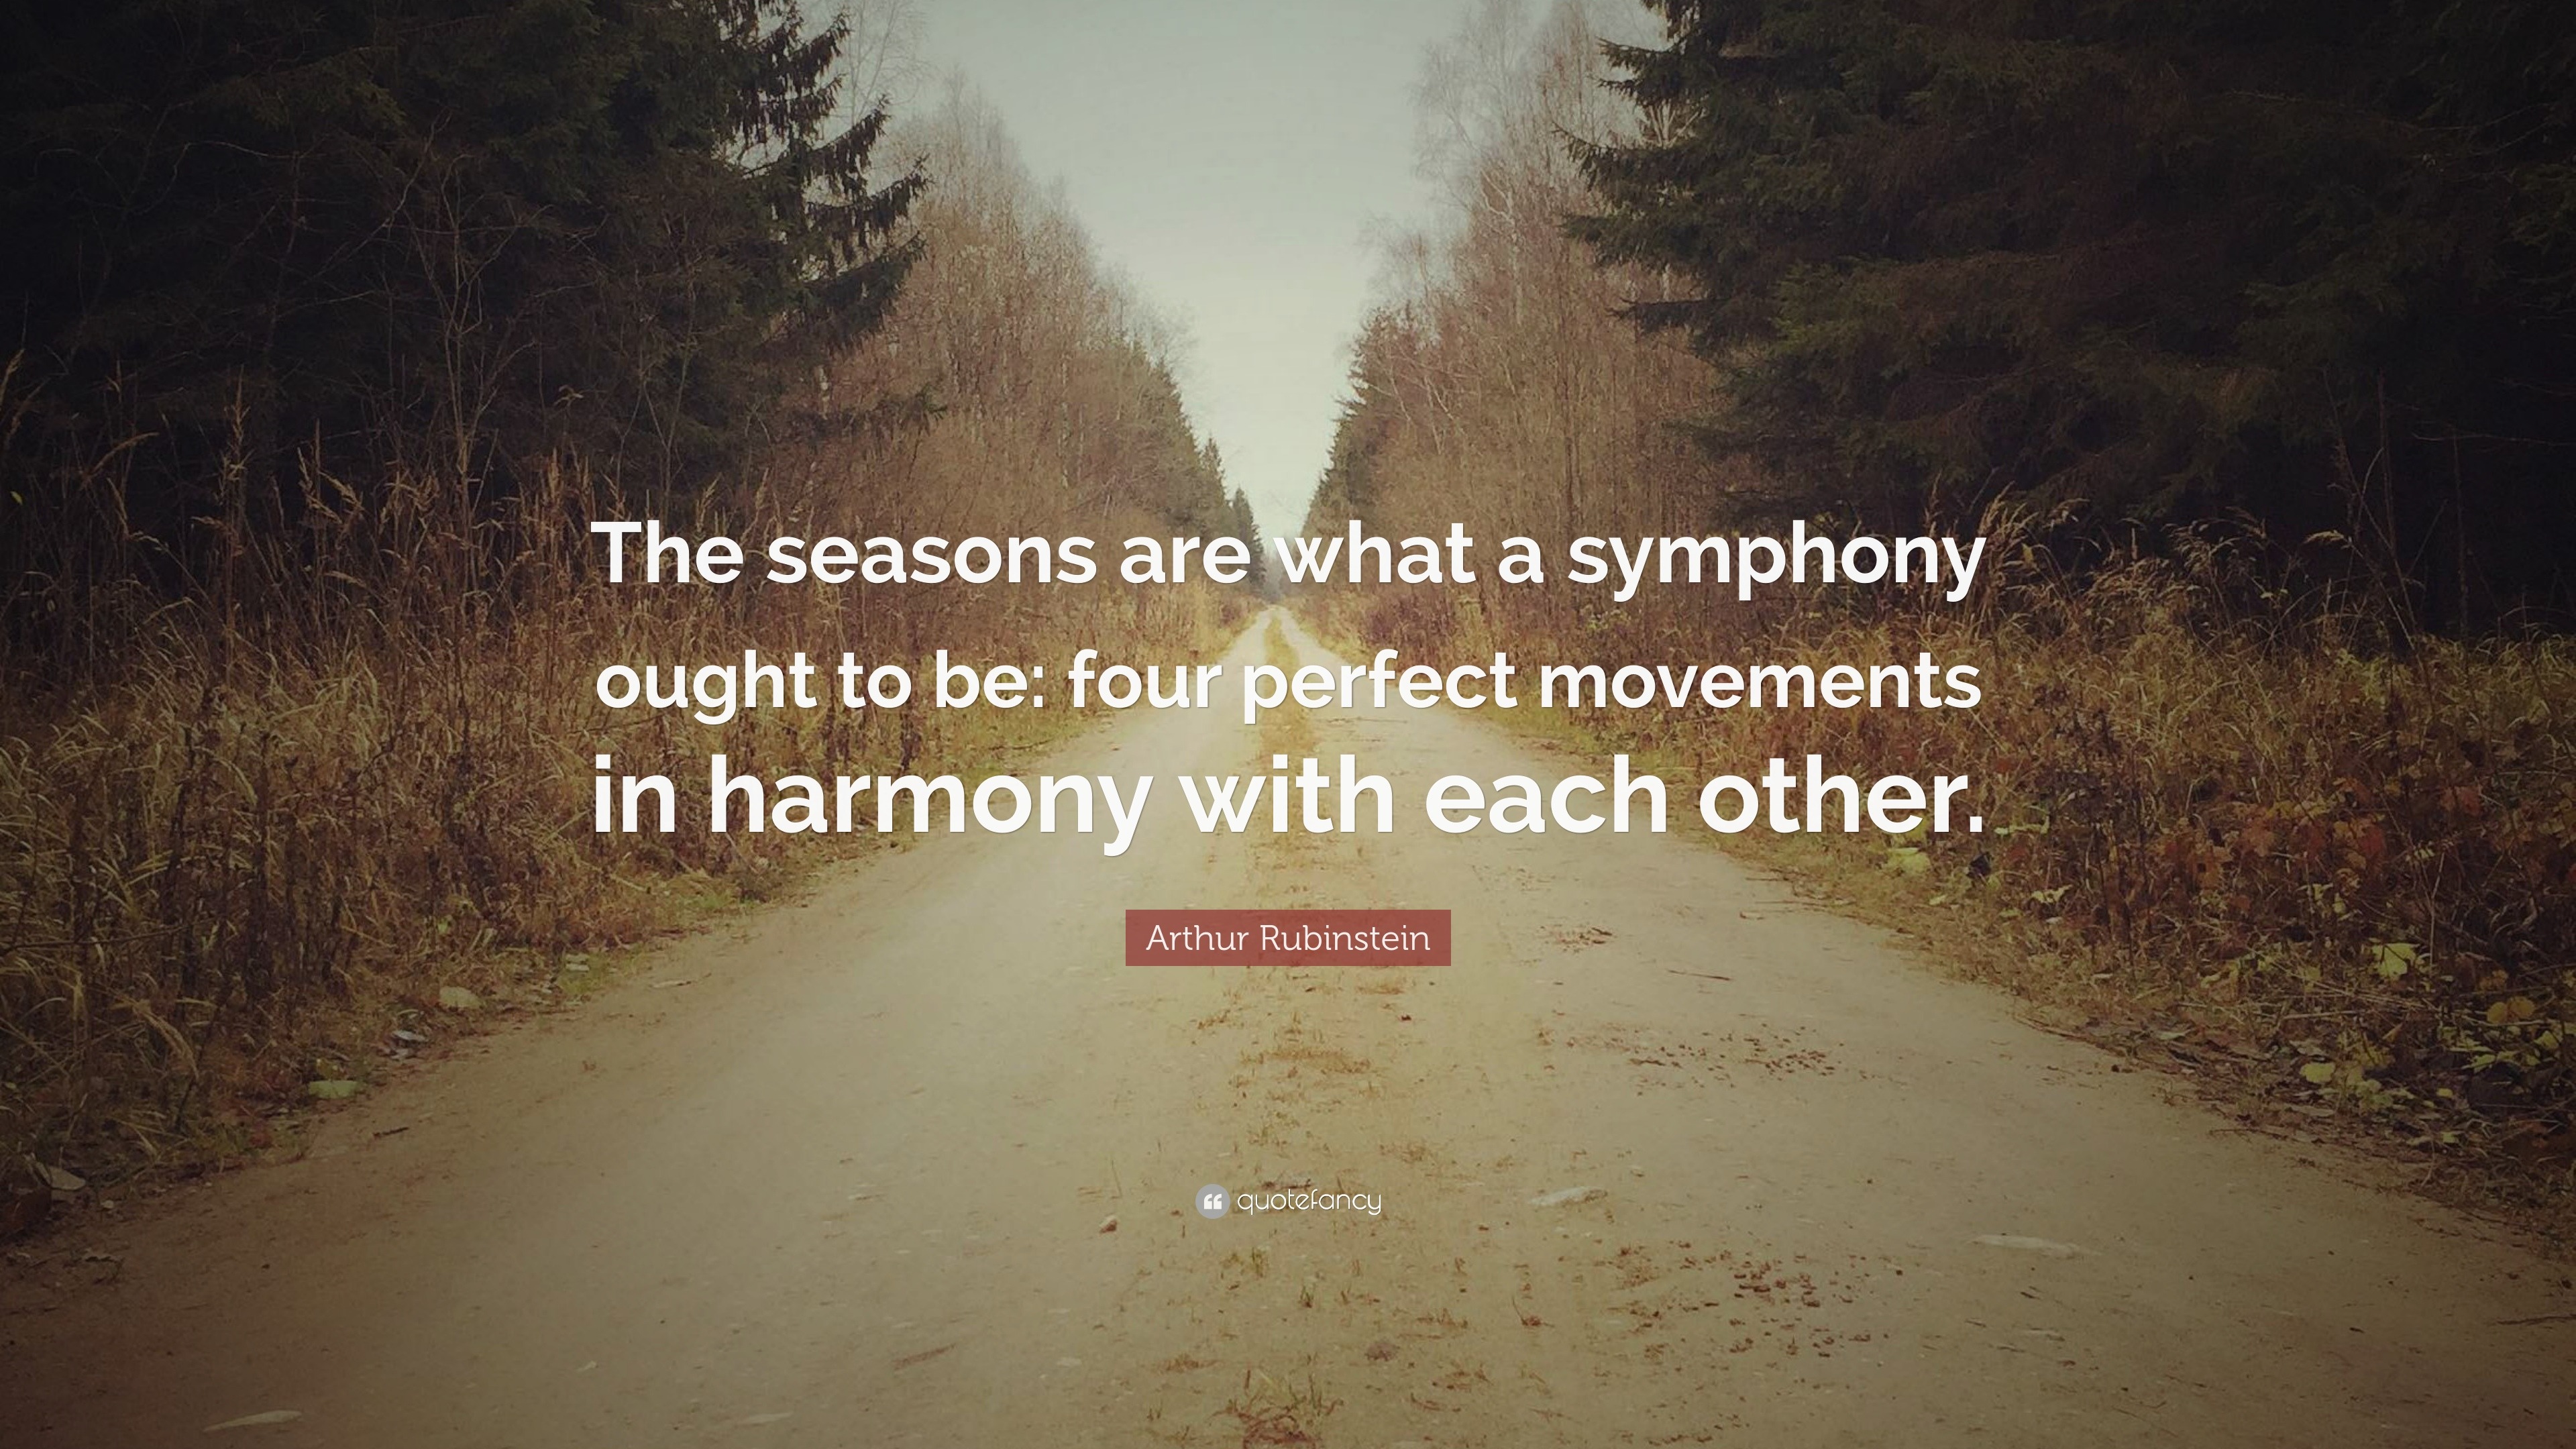 Arthur Rubinstein Quote: “The seasons are what a symphony ought to be